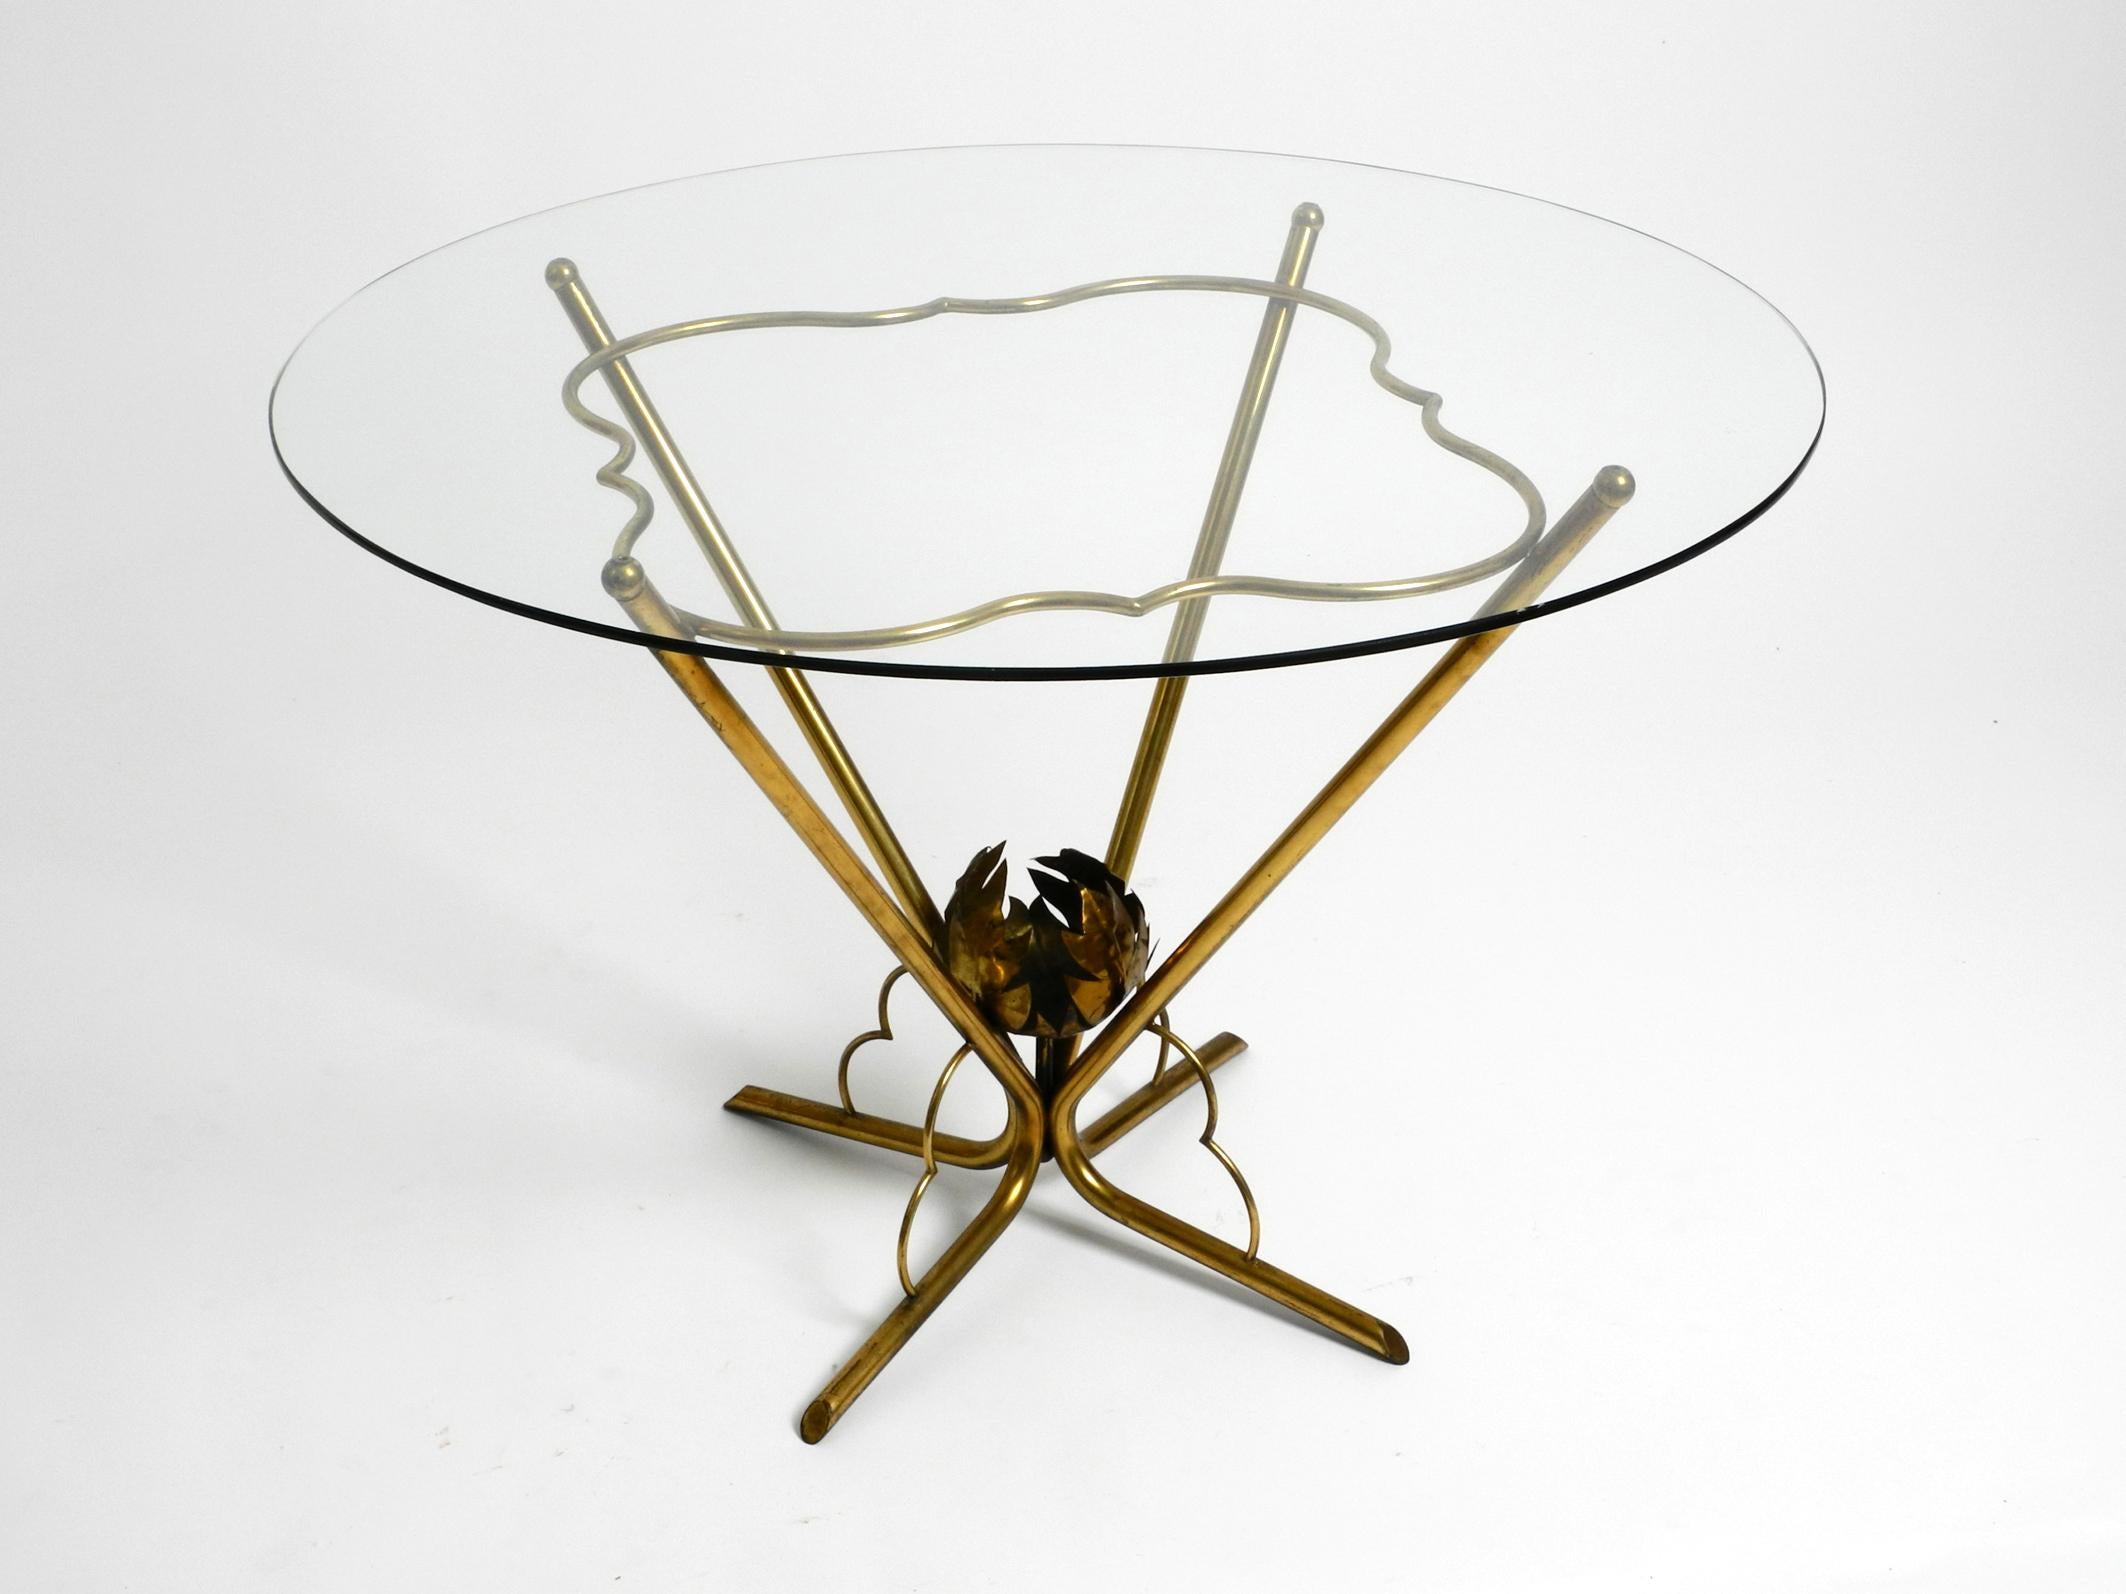 Very rare Italian original Mid Century Modern round glass brass side table.
Beautiful floral 1950s Italy design in very good vintage condition.
Four-legged frame made entirely of tubular brass in a curved shape.
Original round cut glass plate.
There